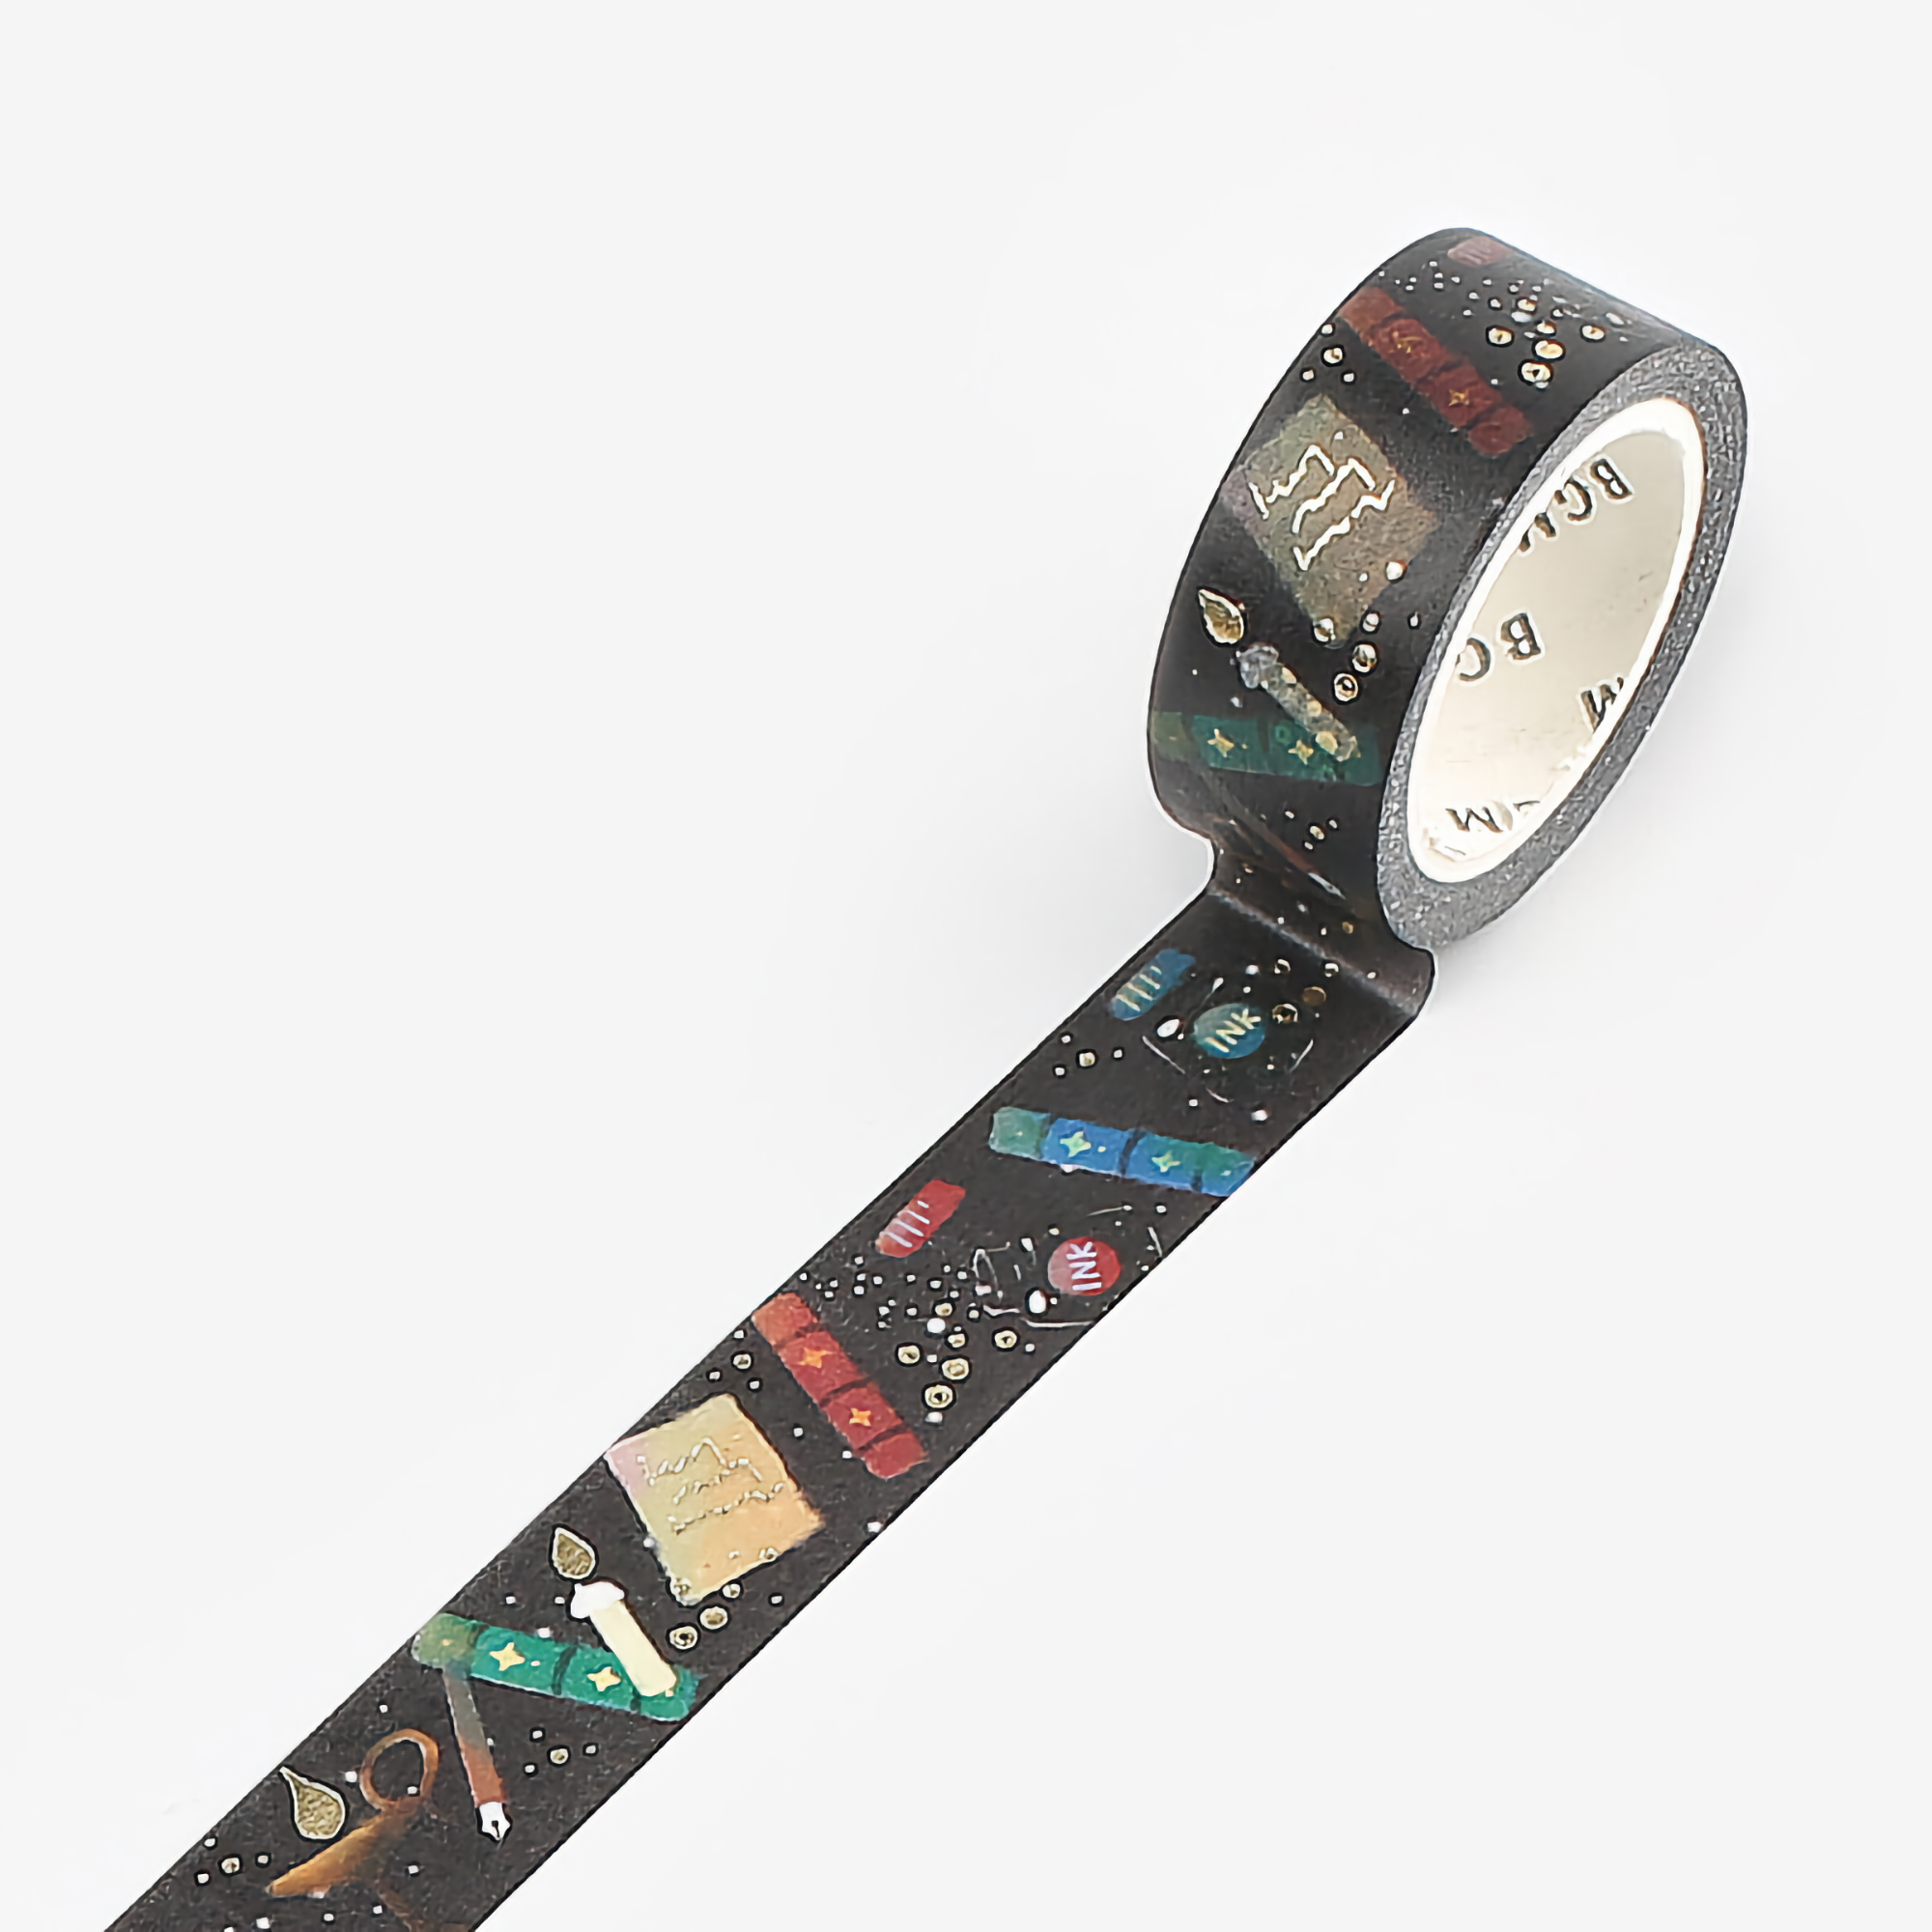 BGM Washi Tape Special Foil Library 15 mm